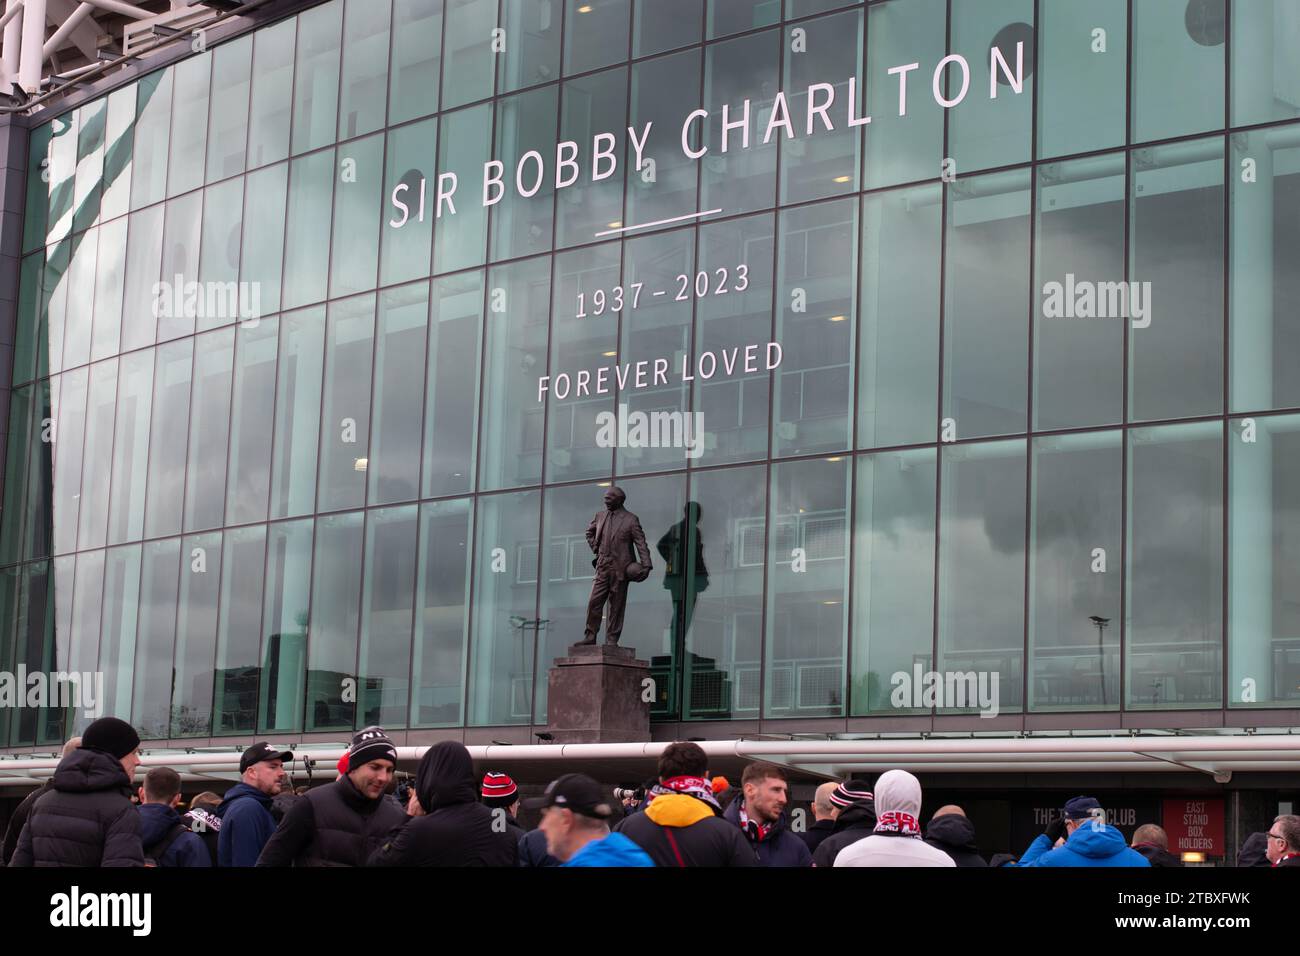 Sir Bobby Charlton sur Old Trafford Manchester United stade de football. Manchester UK. Banque D'Images